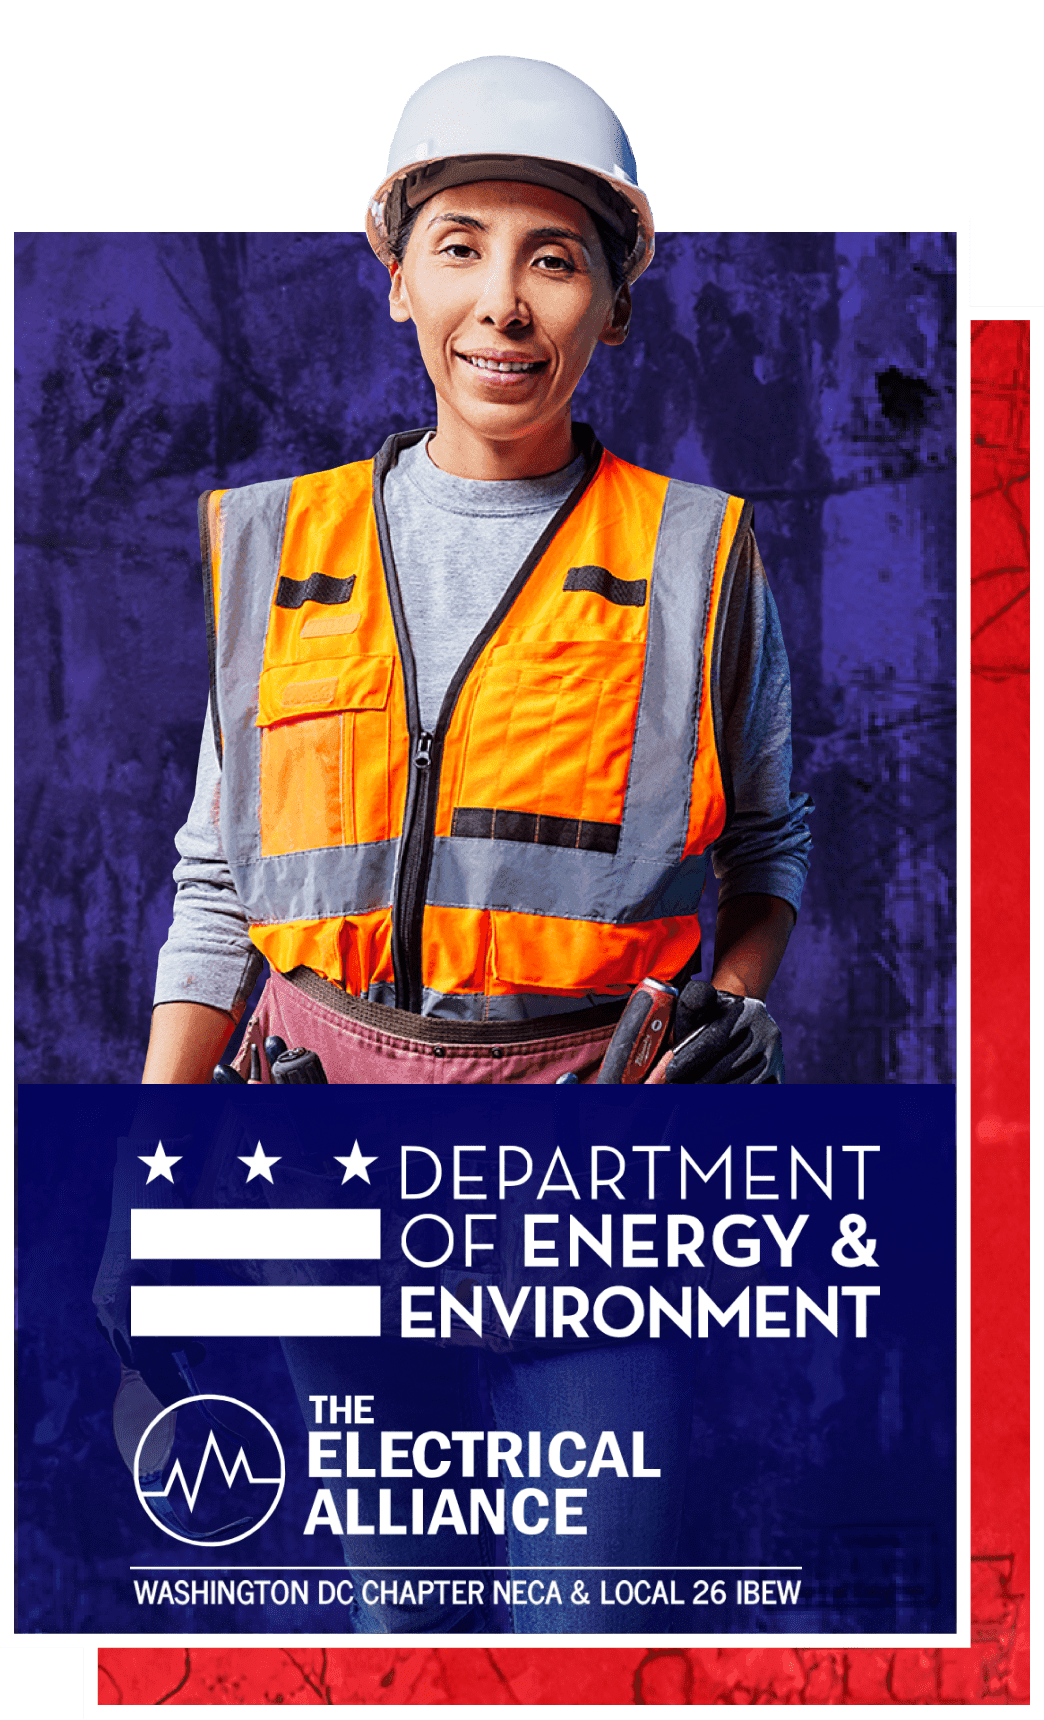 A woman in a hard hat and high visibility vest and the logos for the Department of Energy & Environment and The Electrical Alliance Washington DC Chapter NECA & Local 26 IBEW